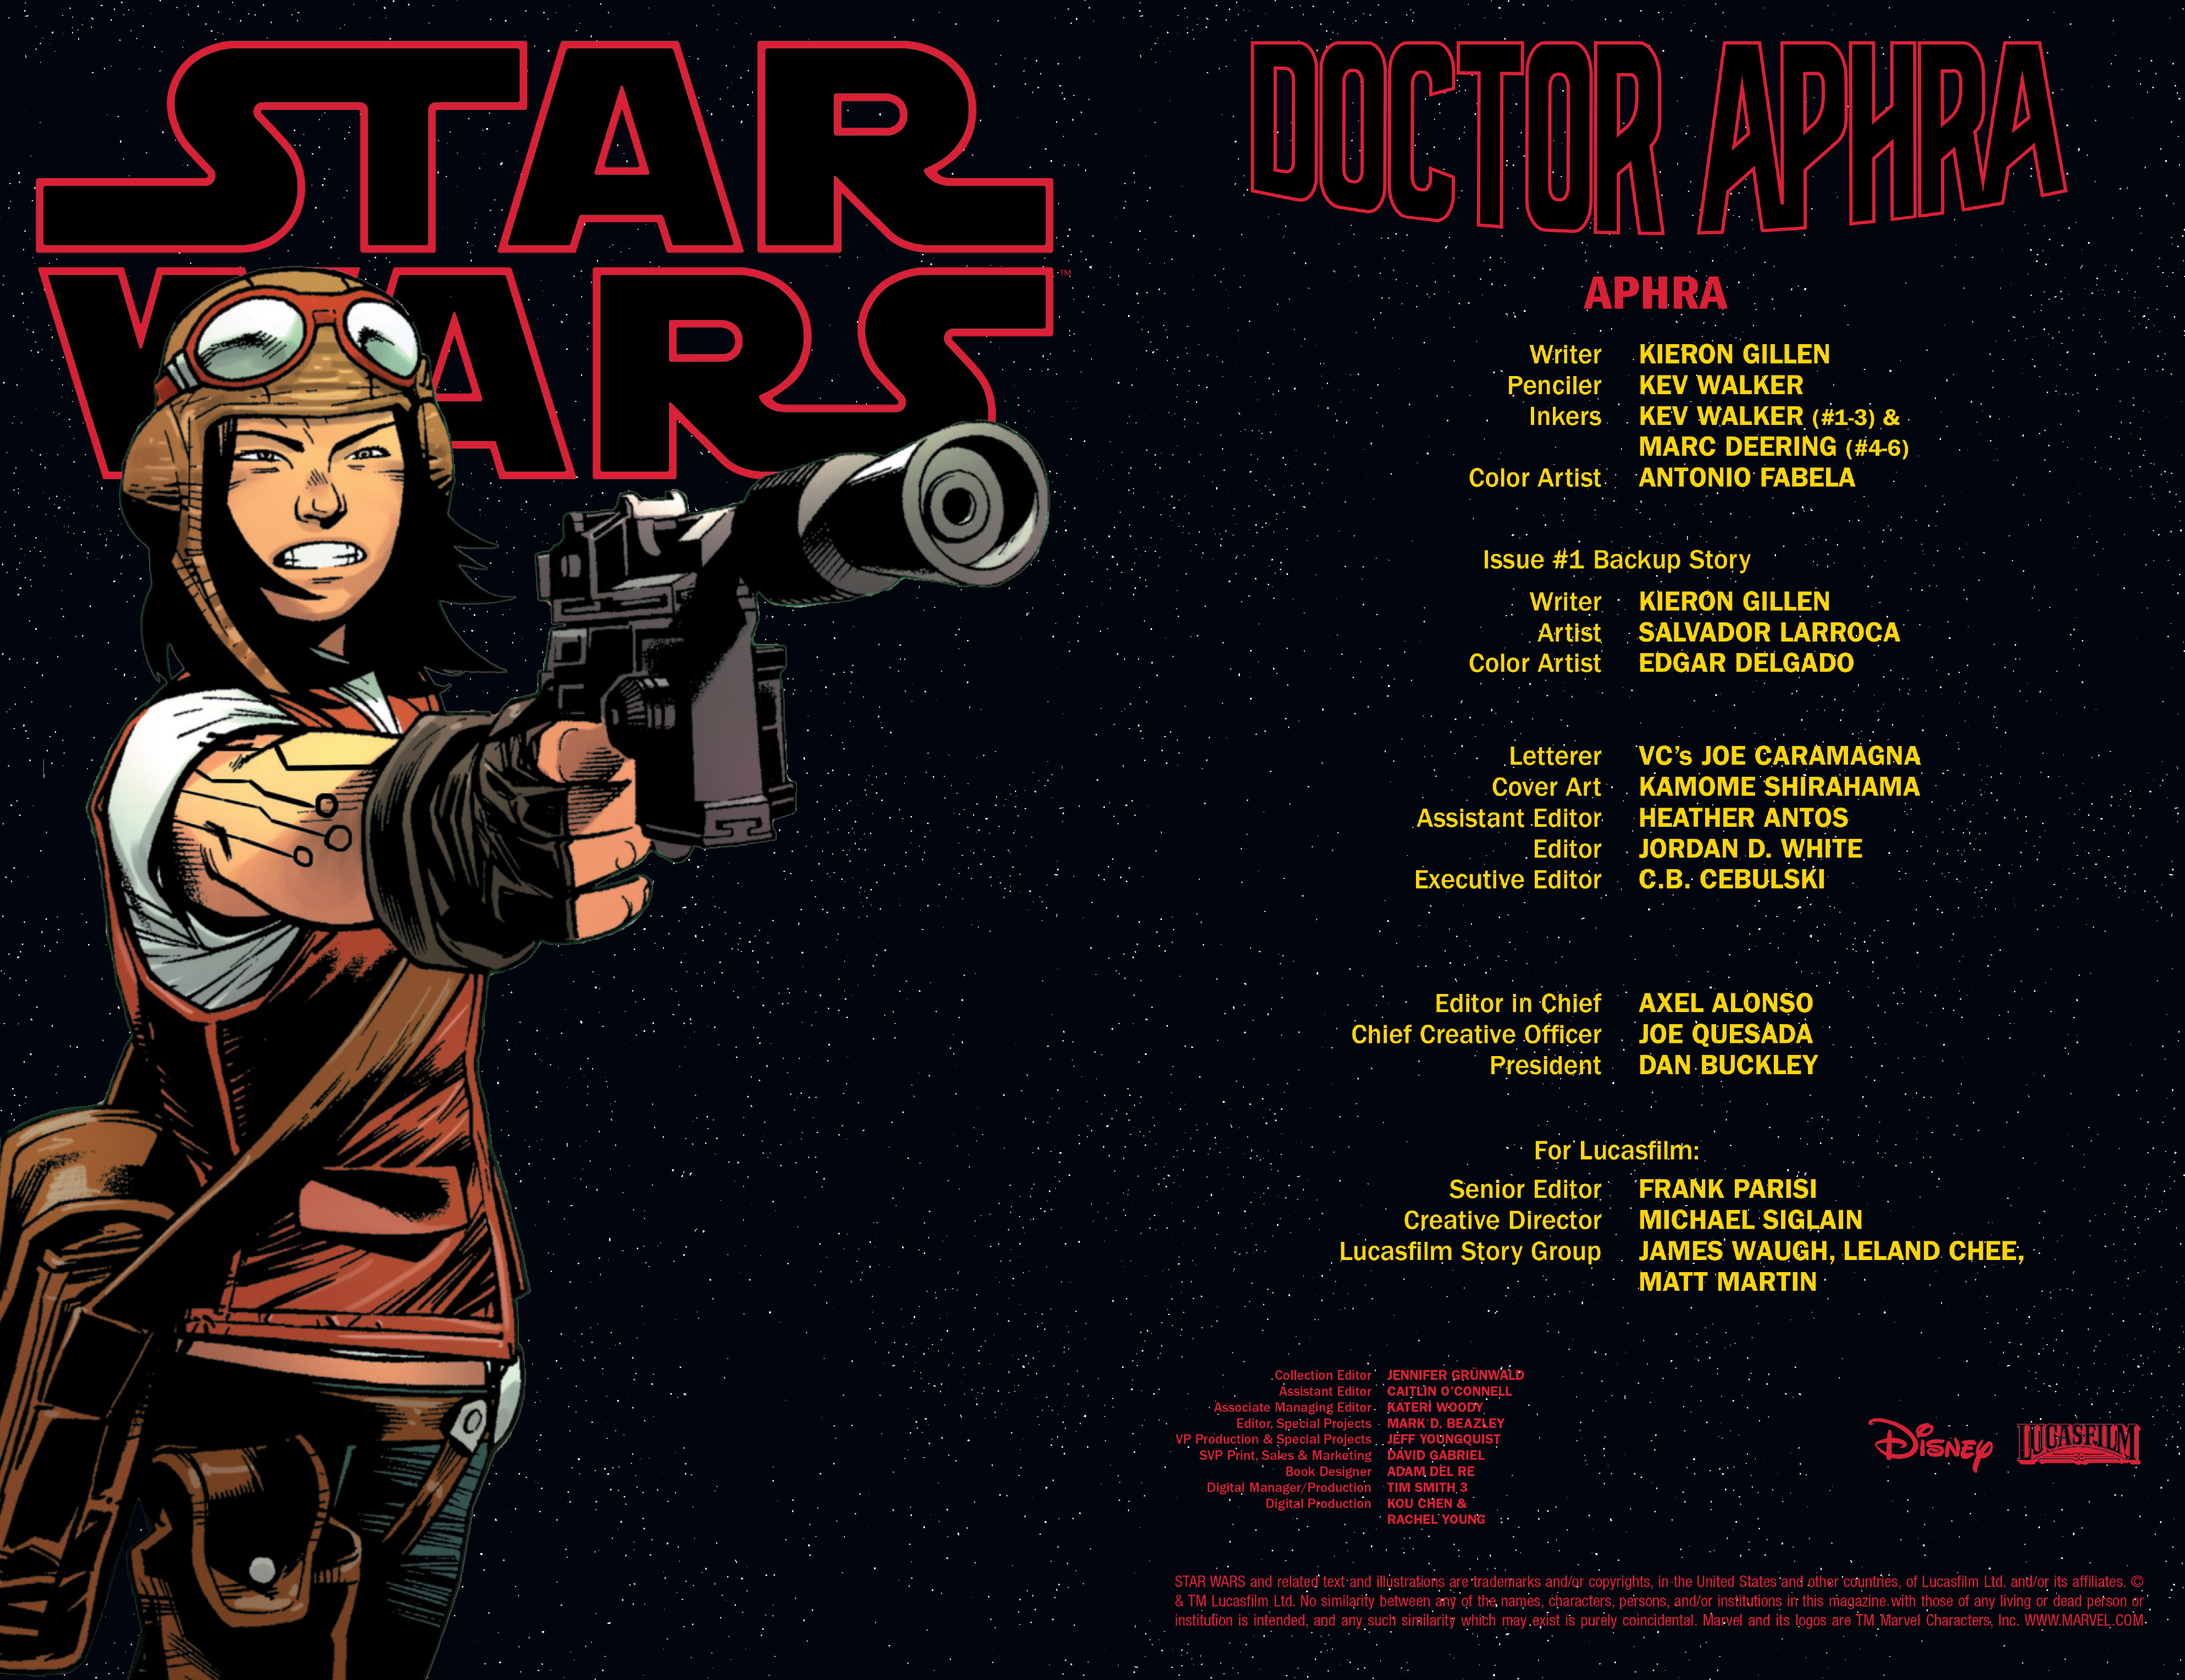 Star Wars: Doctor Aphra Vol. 1: Aphra (TPB): Chapter 1 - Page 3